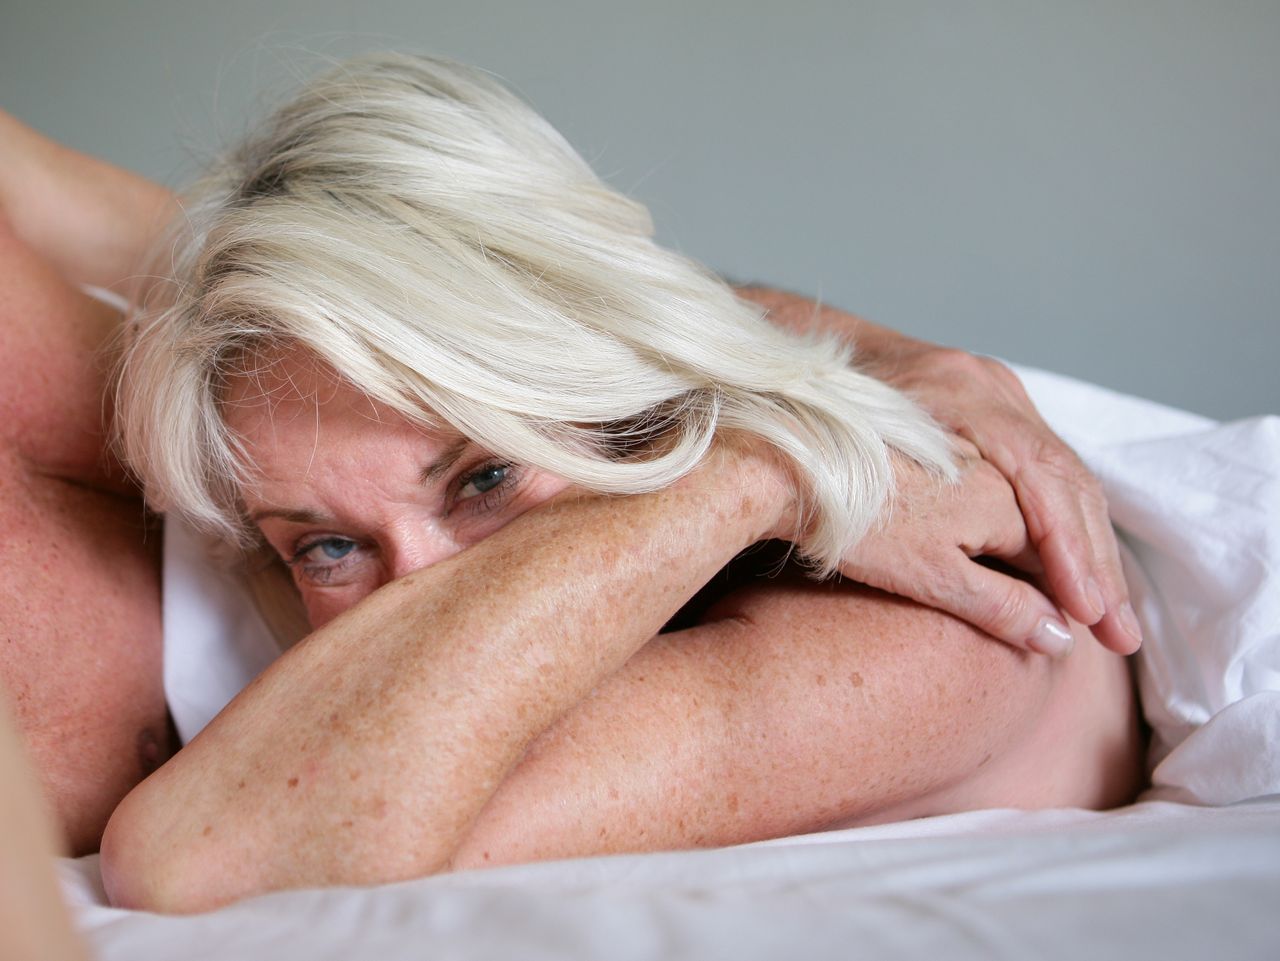 More and more women continue to enjoy successful sex after menopause.